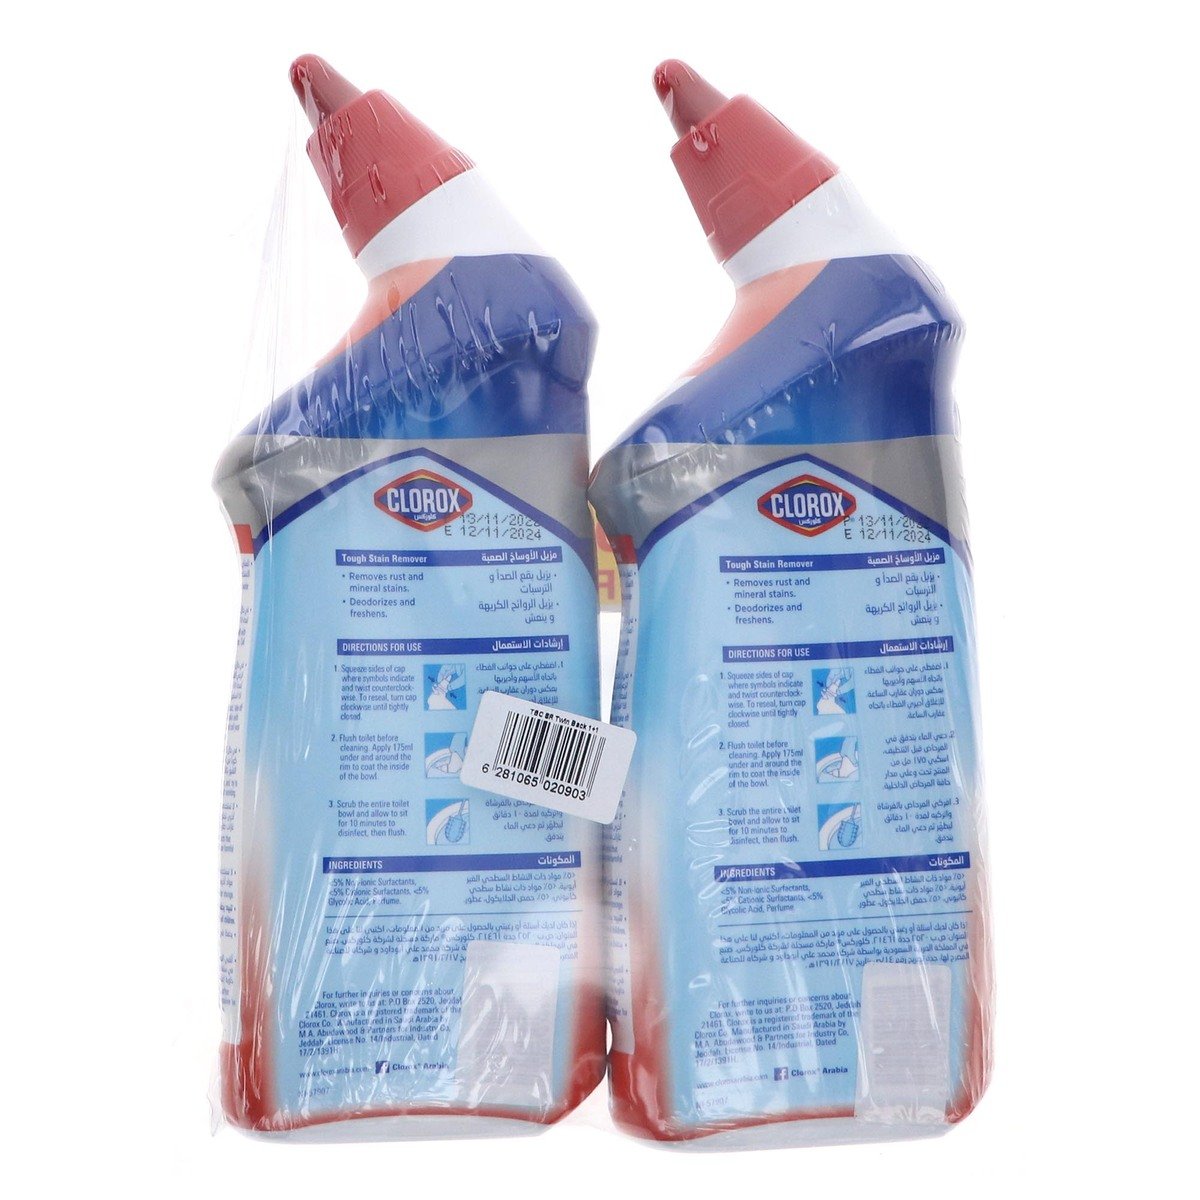 Clorox Tough Stain Remover Toilet Bowl Cleaner 2 x 709 ml